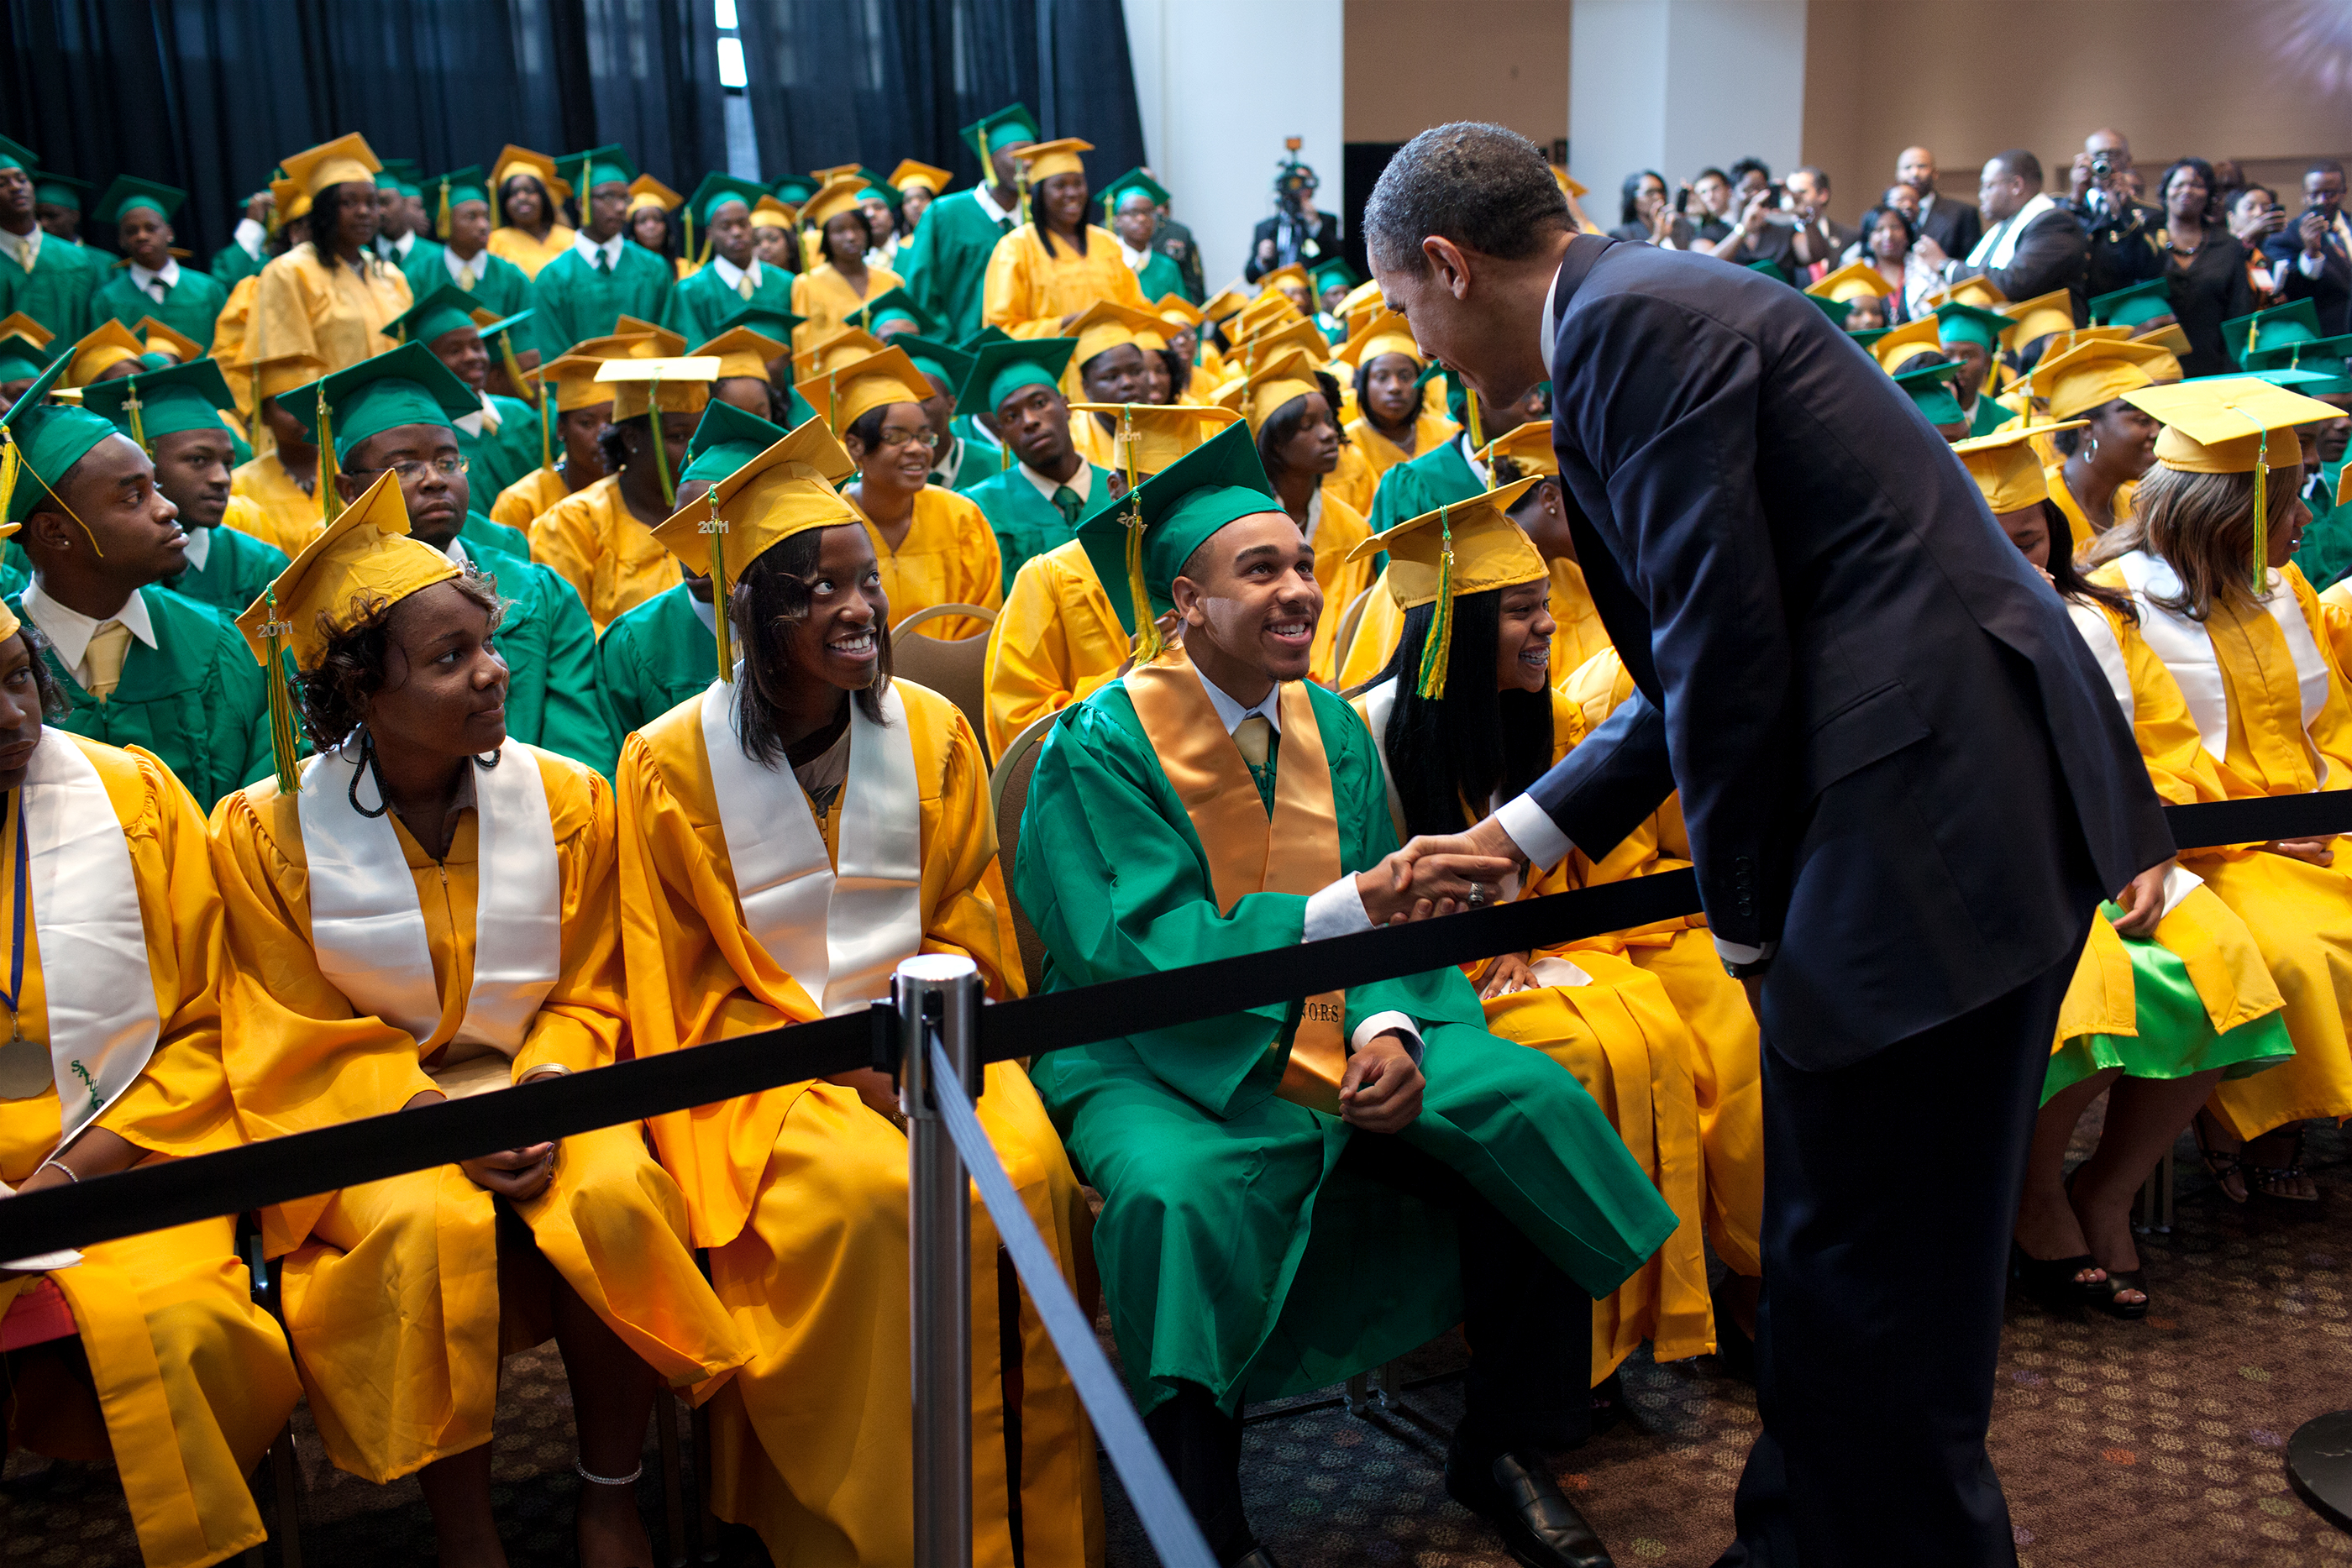 Tennessee, May 16, 2011. Shaking hands with Booker T. Washington students before their commencement ceremony in Memphis. (Official White House Photo by Pete Souza)